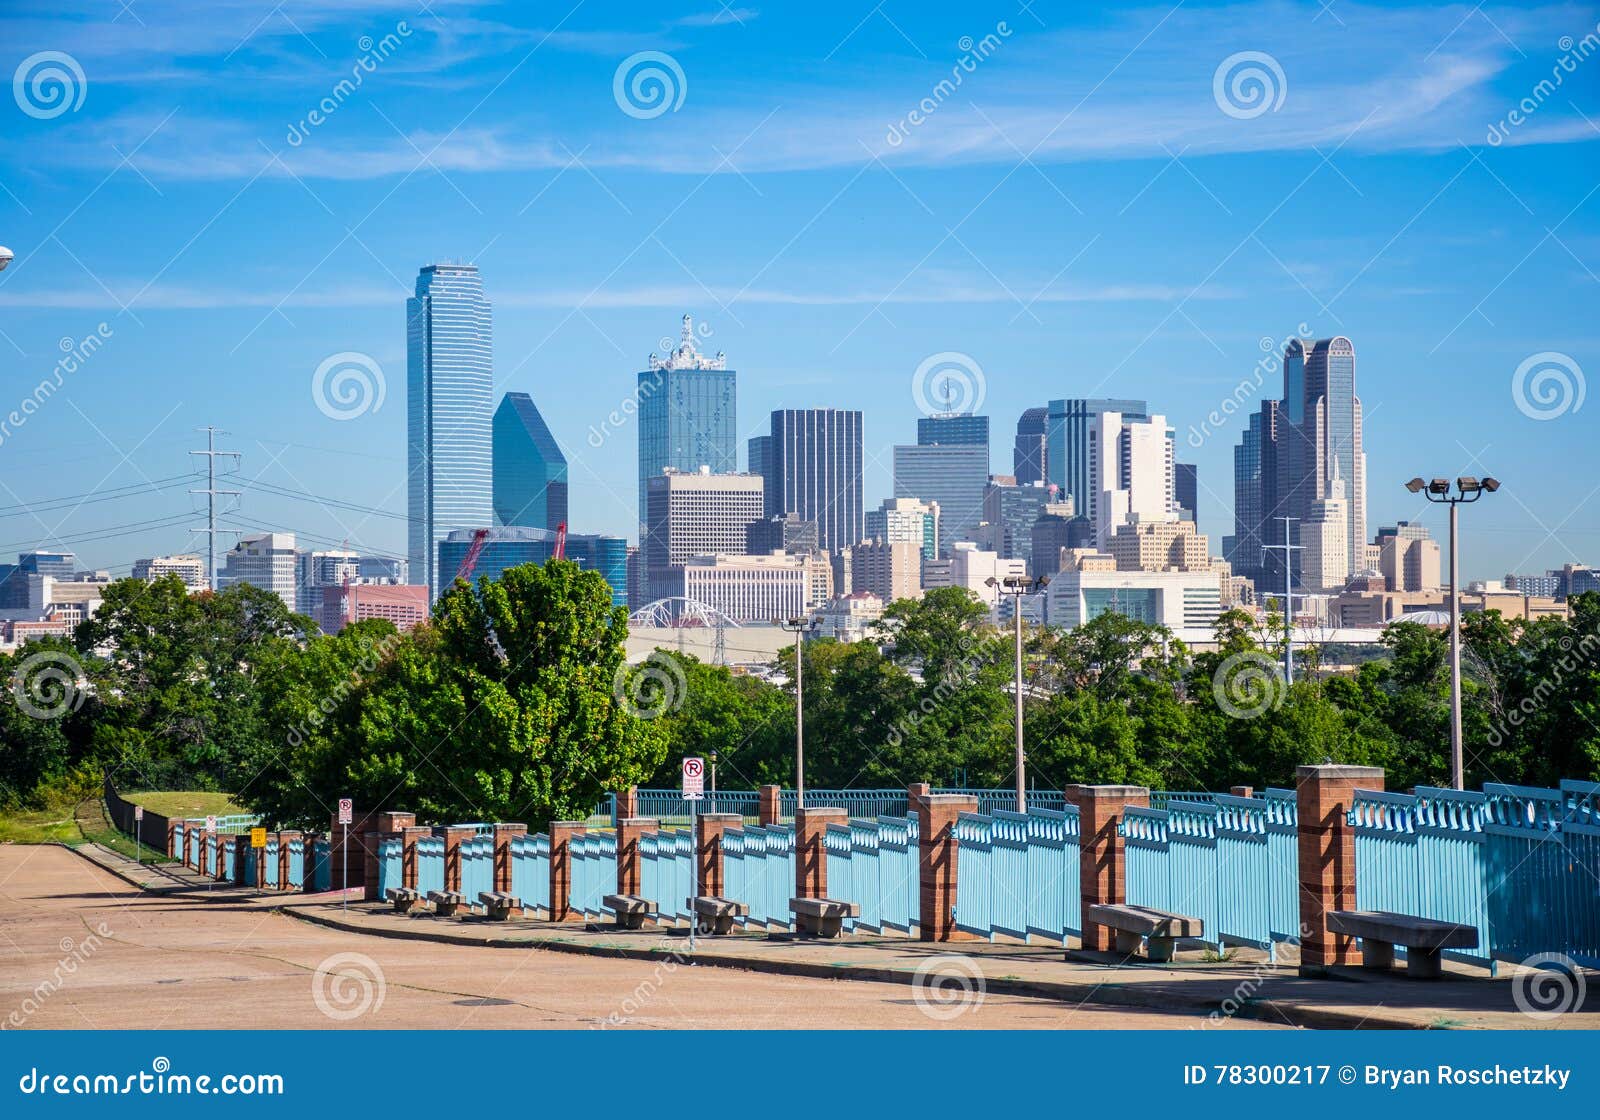 long perspective dallas texas downtown metropolis skyline cityscape with highrises and office buildings on nice sunny day